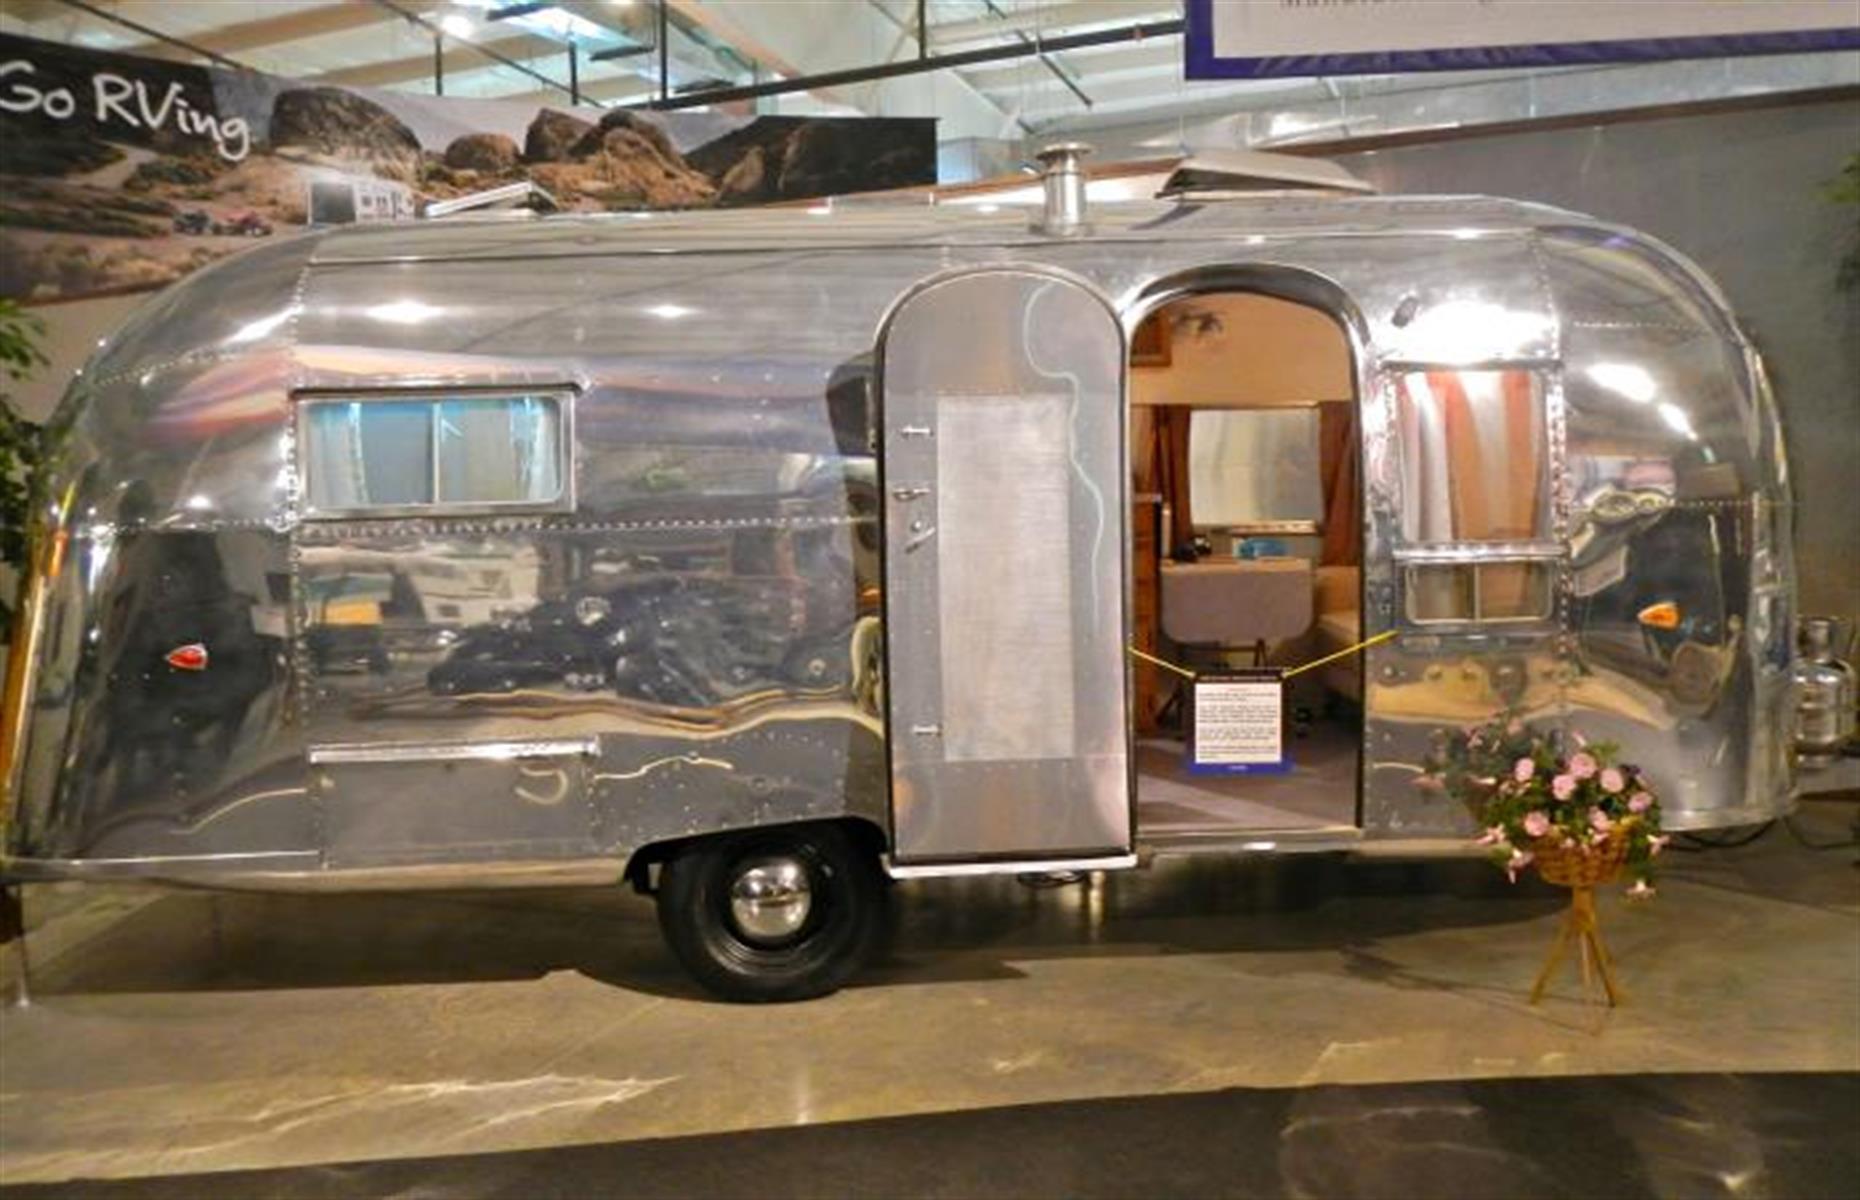 <p>Byam died in 1962, leaving behind a super-successful trailer company that had become known worldwide. America's most <a href="https://www.loveproperty.com/gallerylist/62456/millionaire-motorhomes-the-worlds-most-expensive-rvs">luxurious trailers</a>, Airstream RVs of the time featured the latest modern conveniences, from air conditioning to refrigerators.</p>